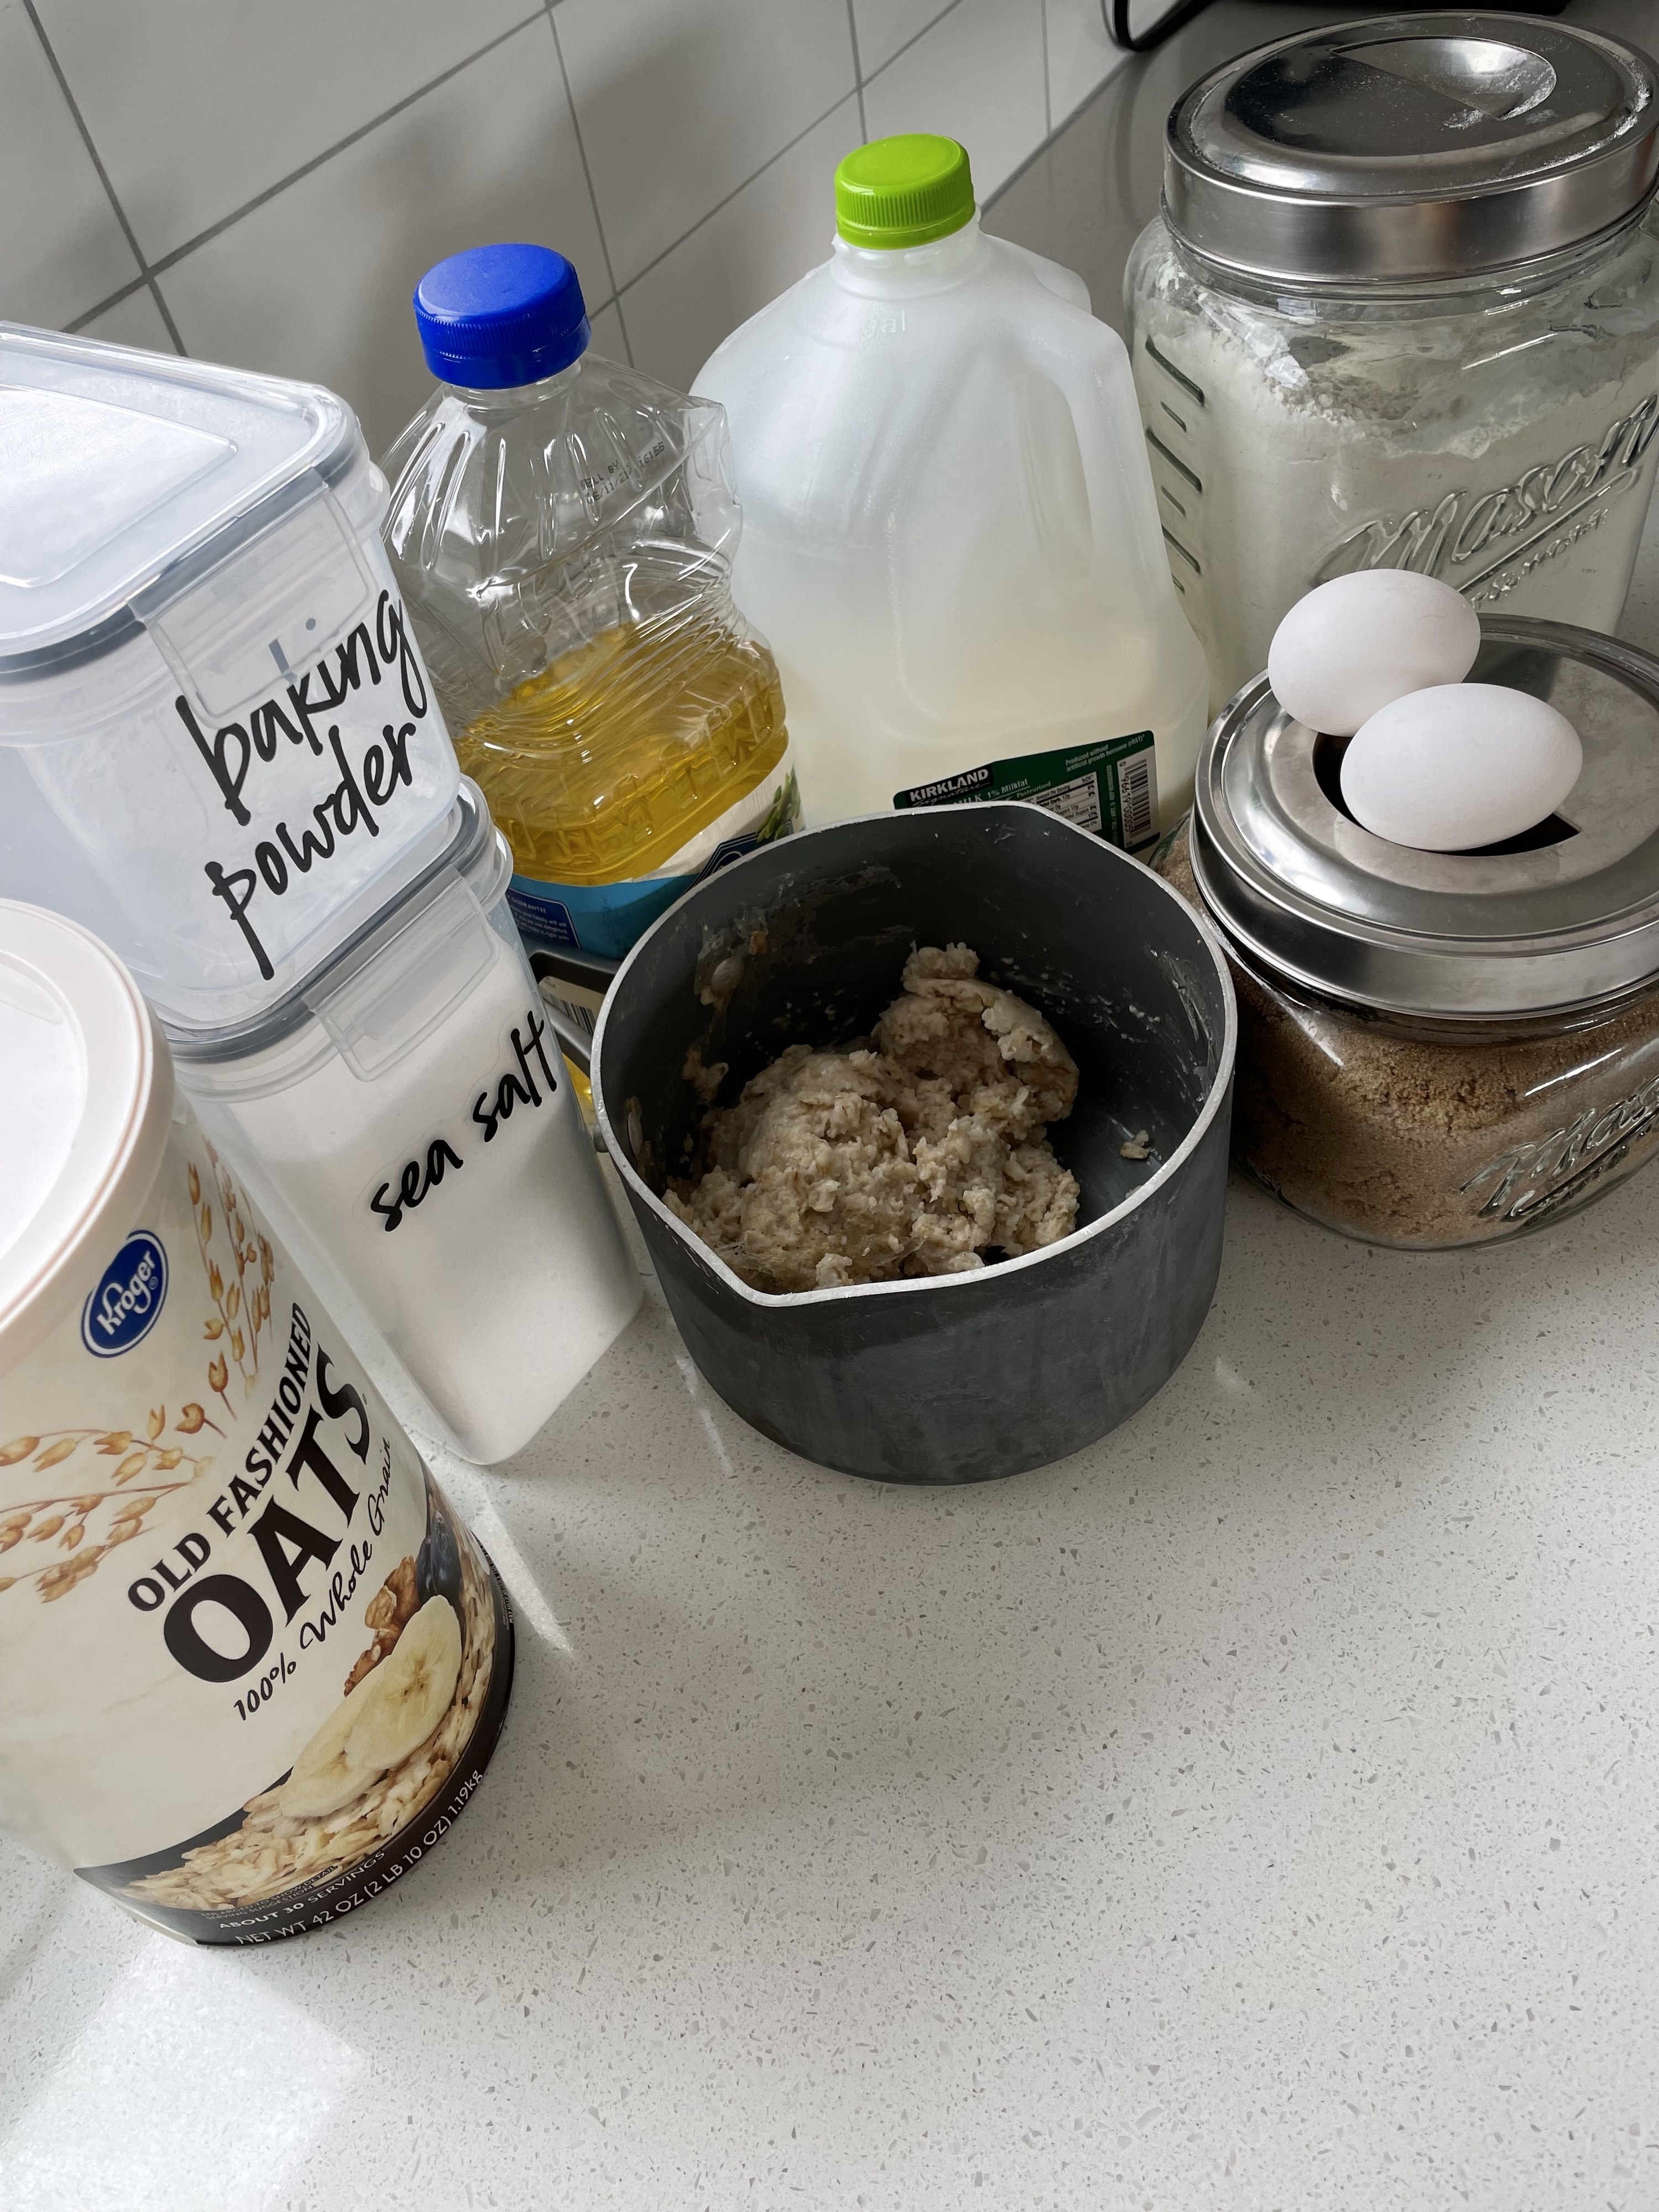 Ingredients for oatmeal muffins